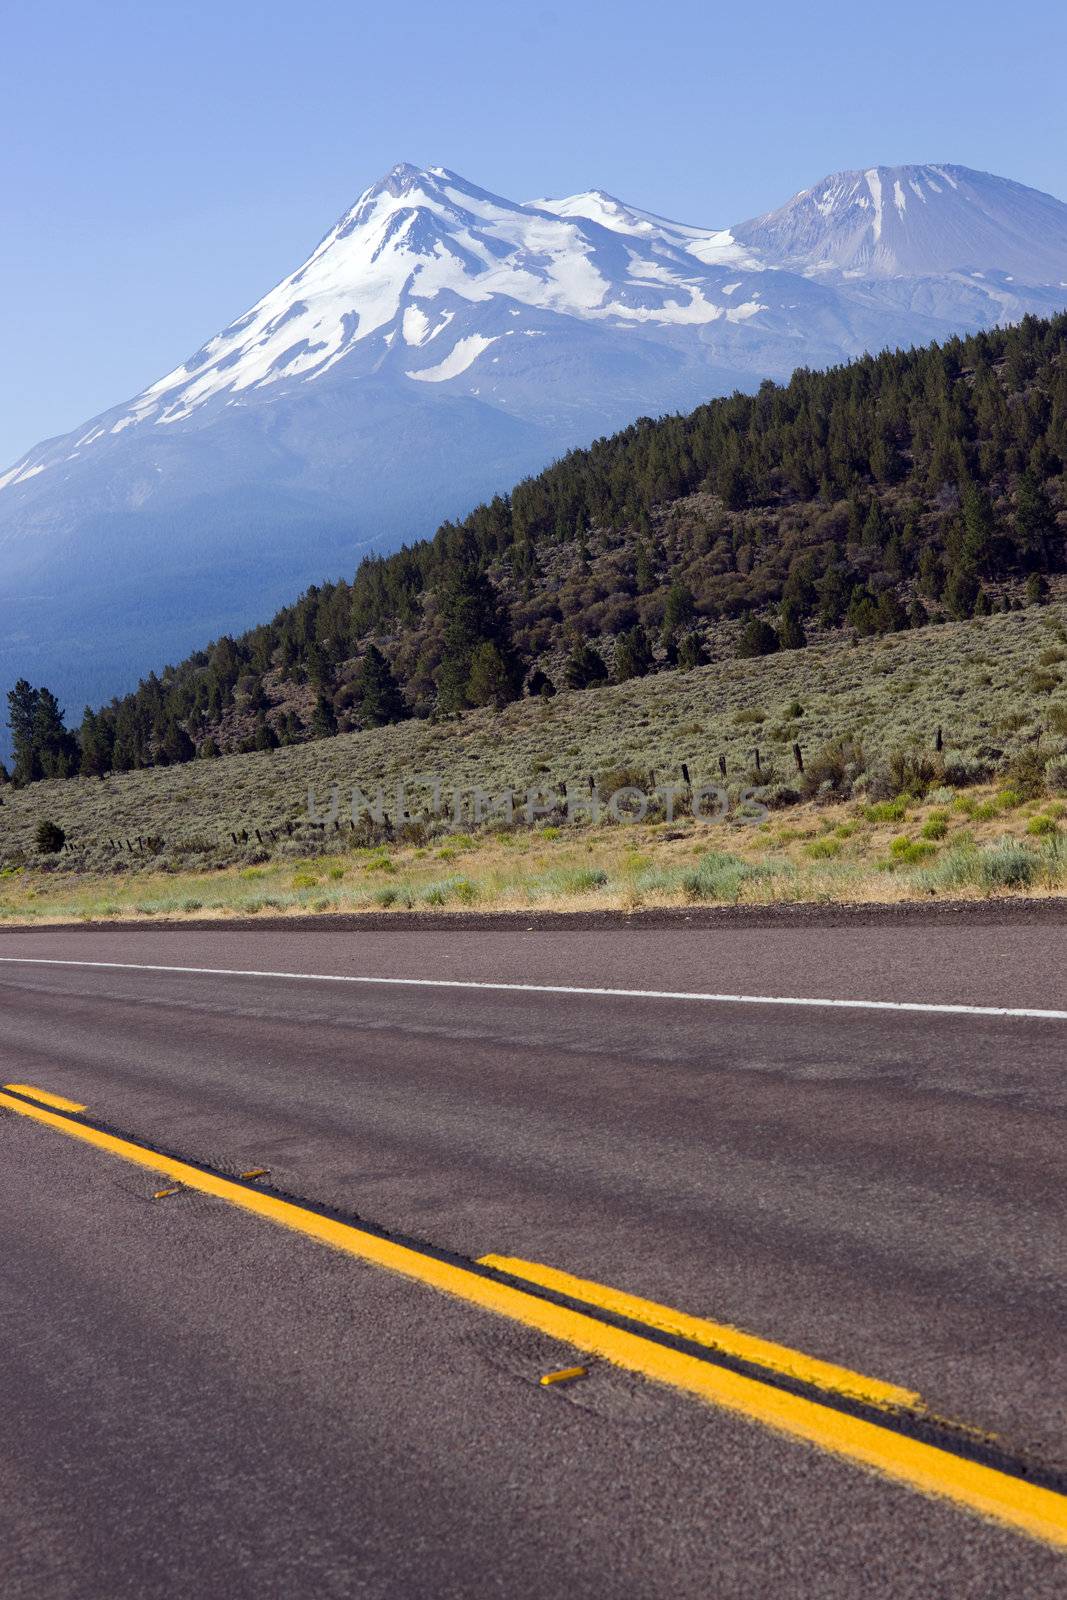 The Road to Mount Shasta in California